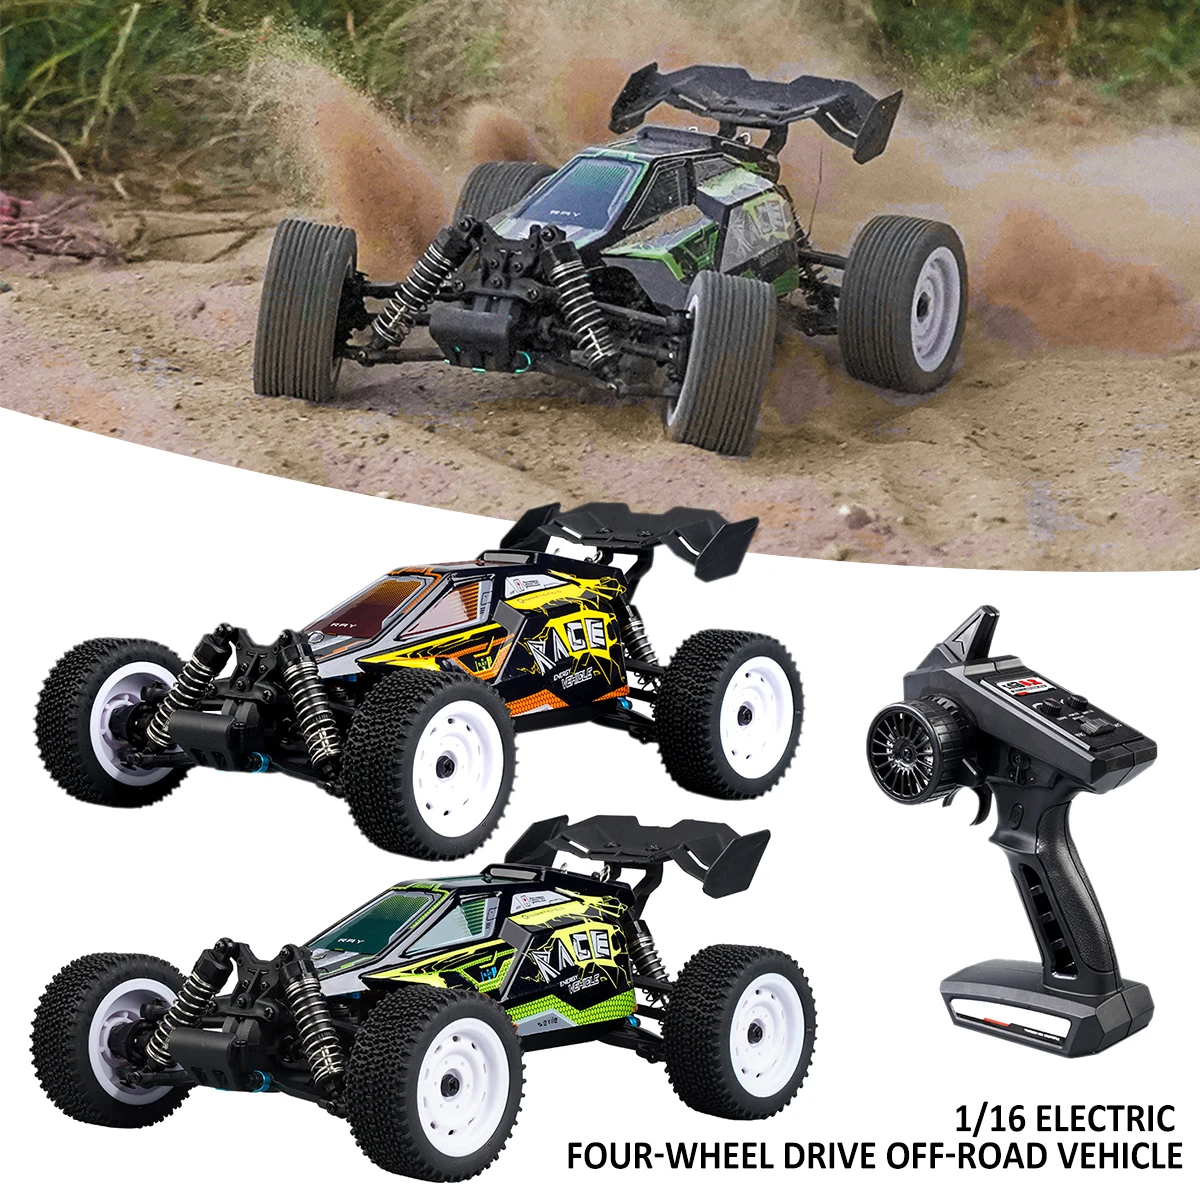 Enlarge 2.4G RC Car 1:16 Remote Control Drift Racing Car 4WD 35km/h High Speed Off Road Vehicles Electronic Race Toy Gift for Kids Adult